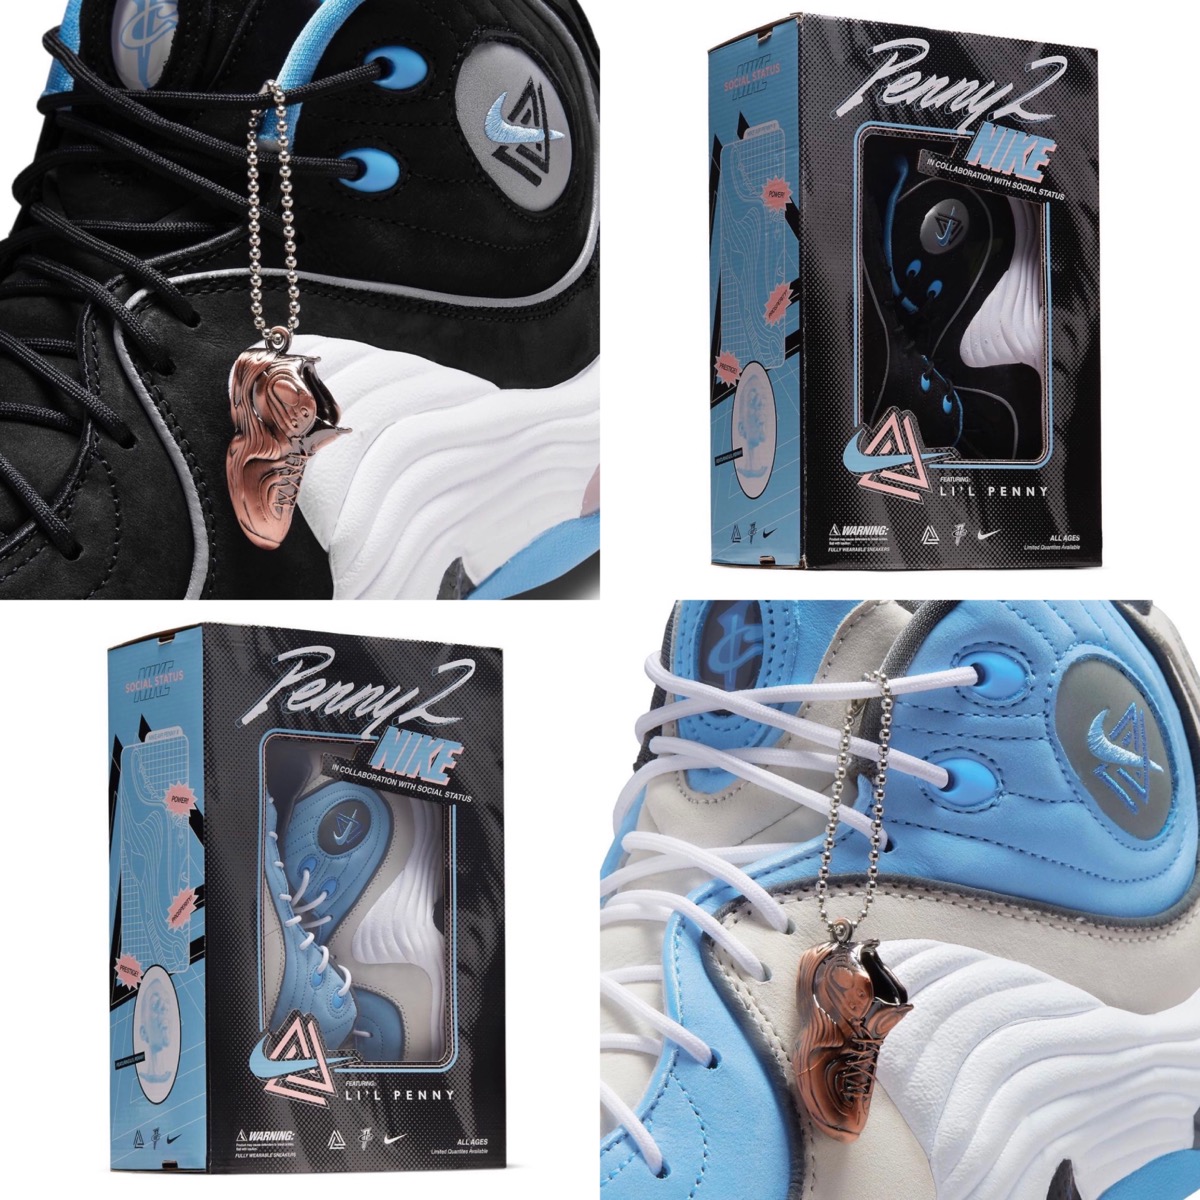 Social Status × Nike Air Penny 2 “Playground”が海外10月13日/11月4日より発売予定 | UP TO  DATE